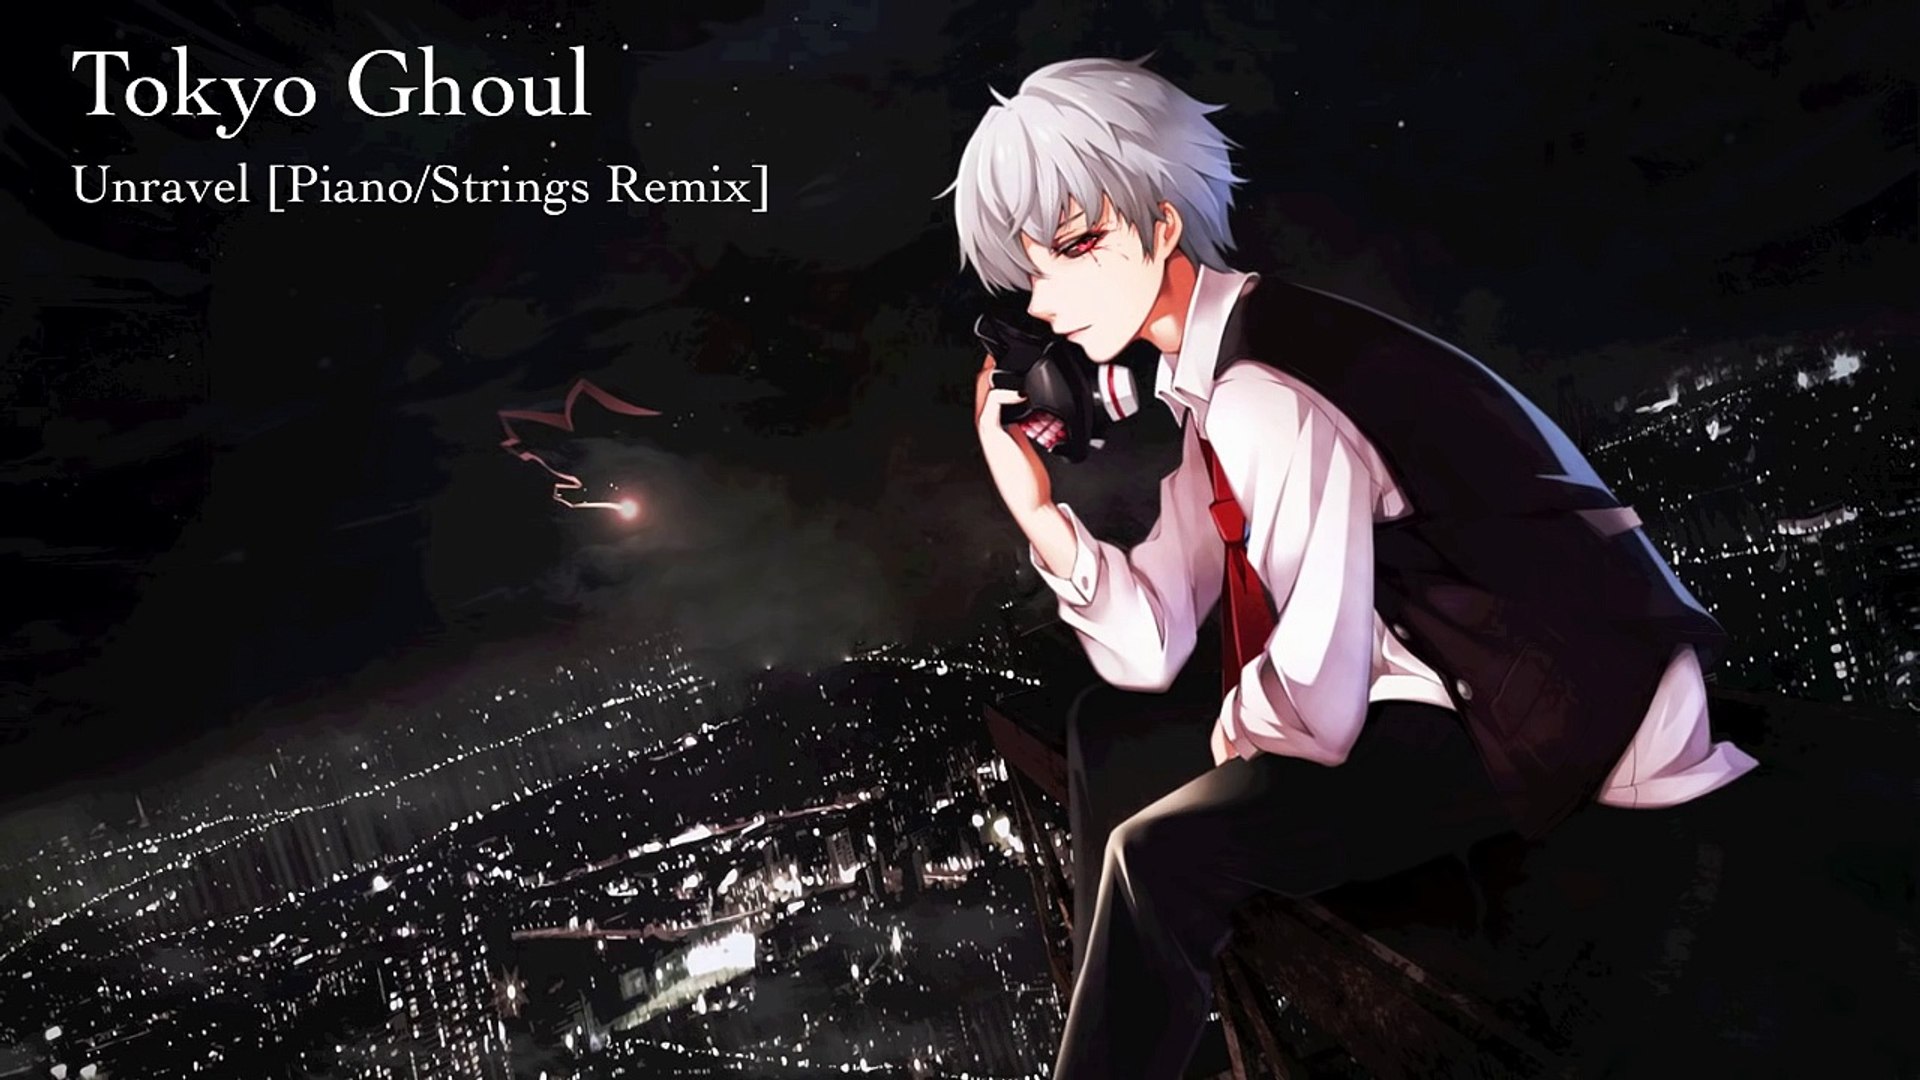 inteligente Pensar repentino Unravel - Tokyo Ghoul [Piano/Strings Instrumental Remix] - video Dailymotion